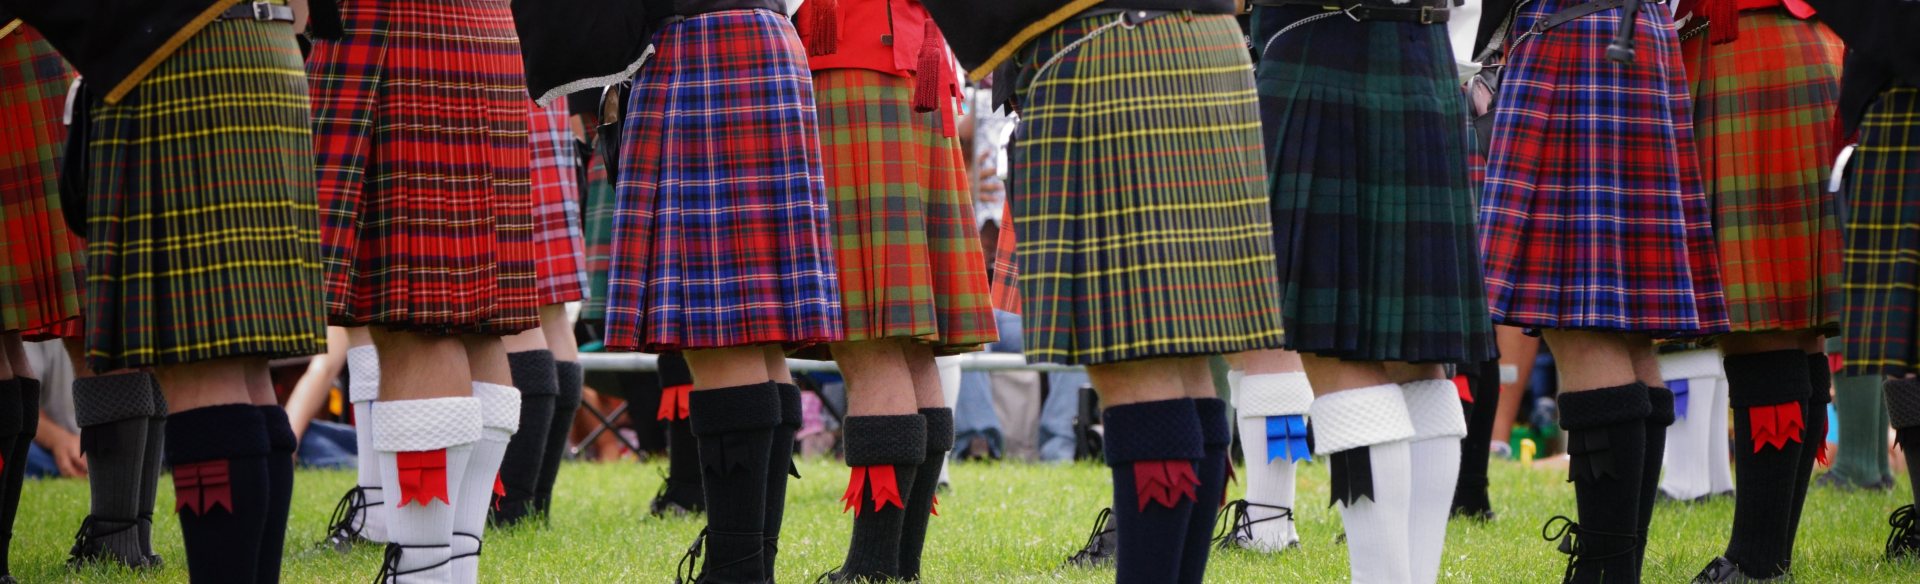 The legs of proud members of Scottish clans wearing kilts in a row